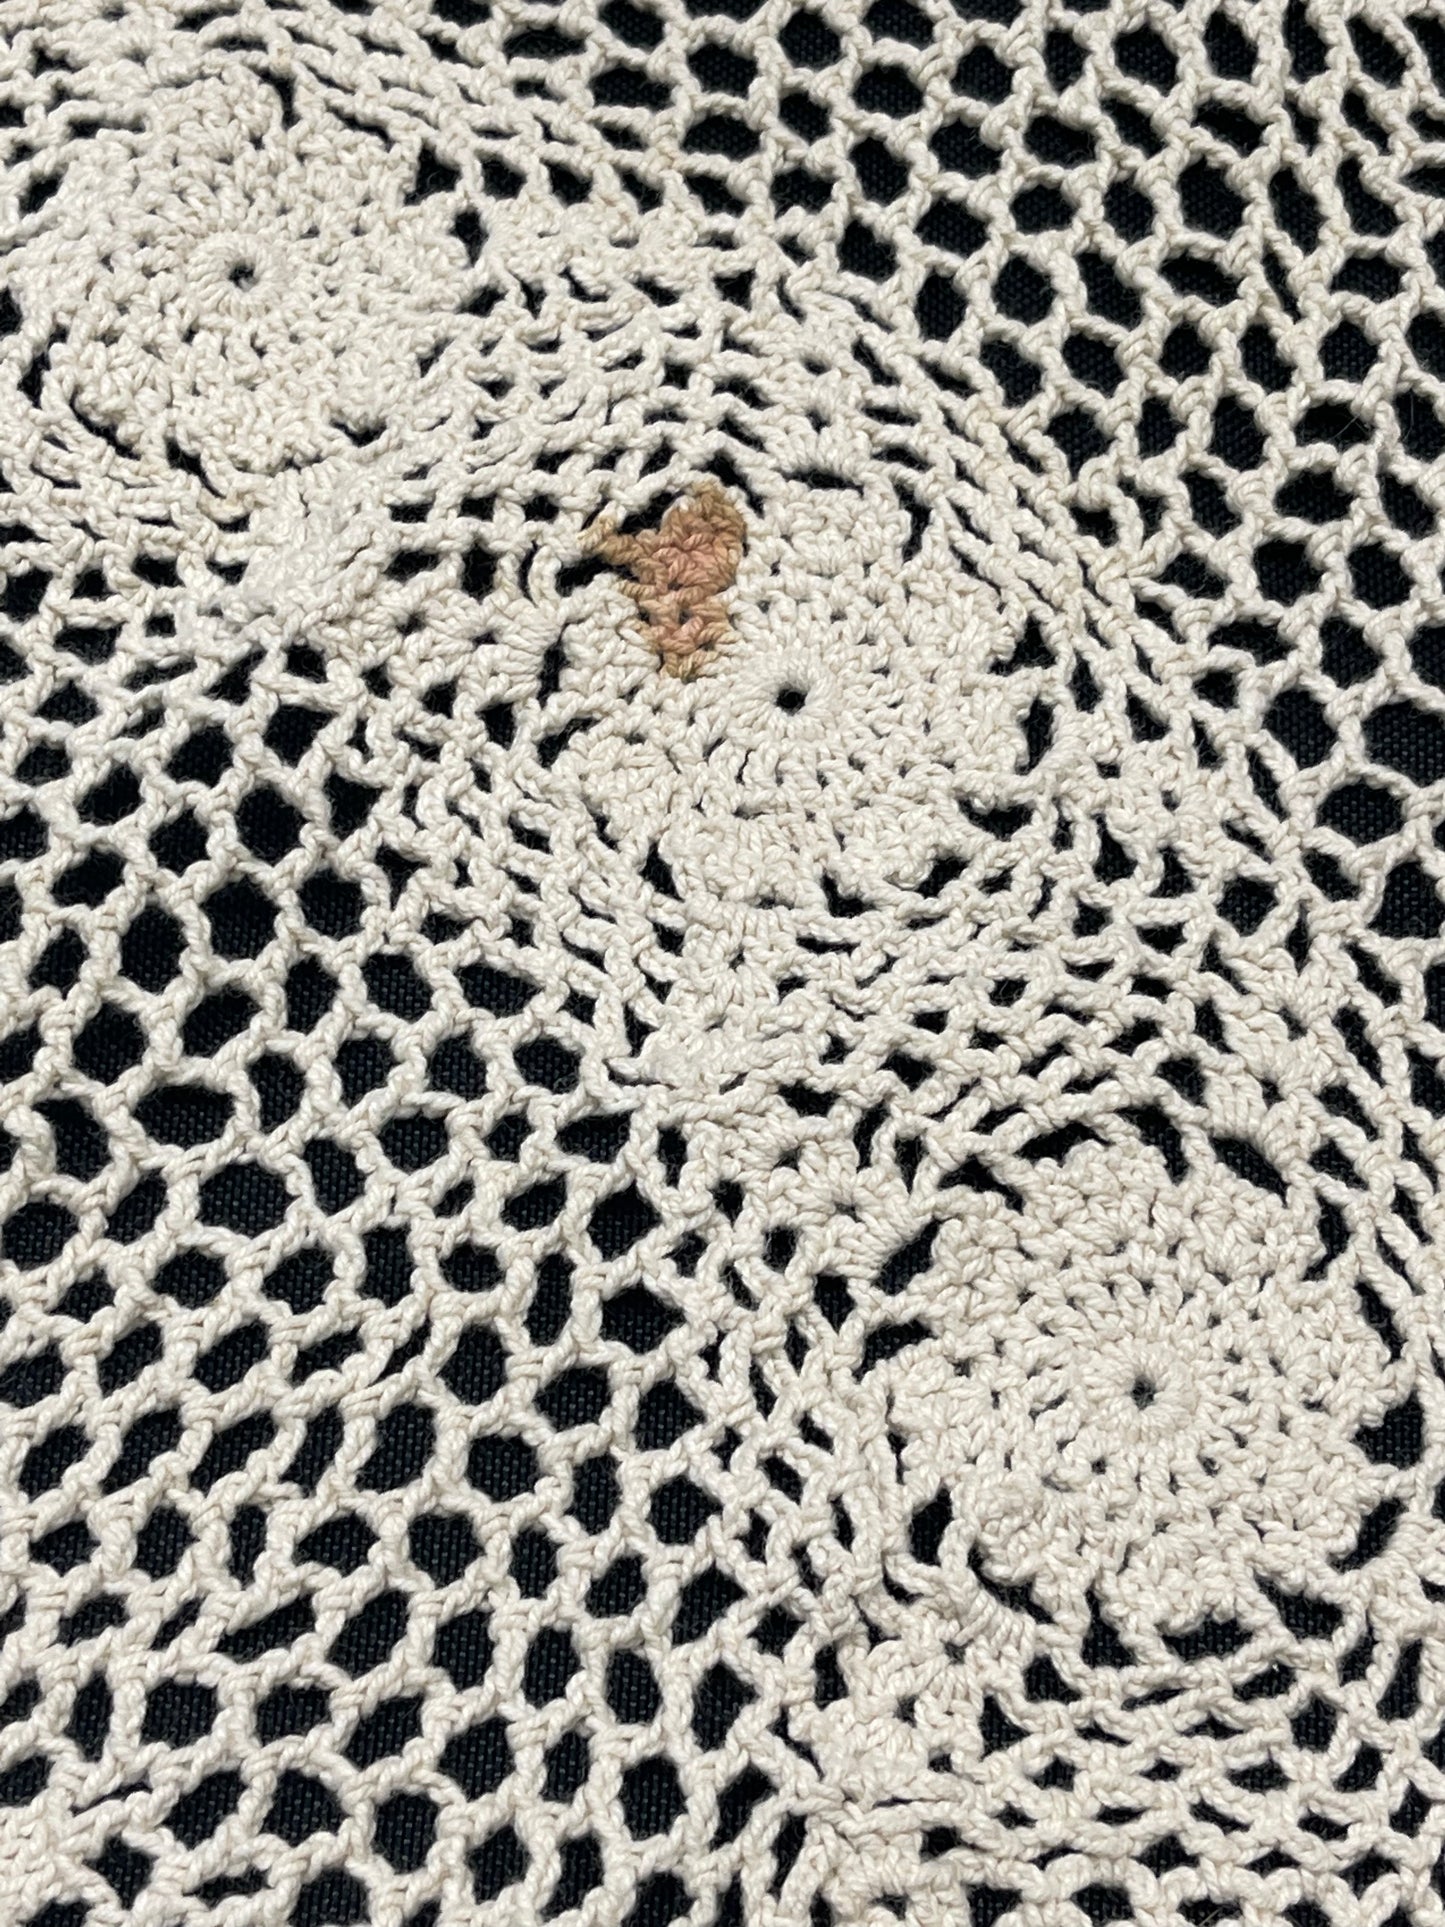 Crocheted Lace Round Tablecloth